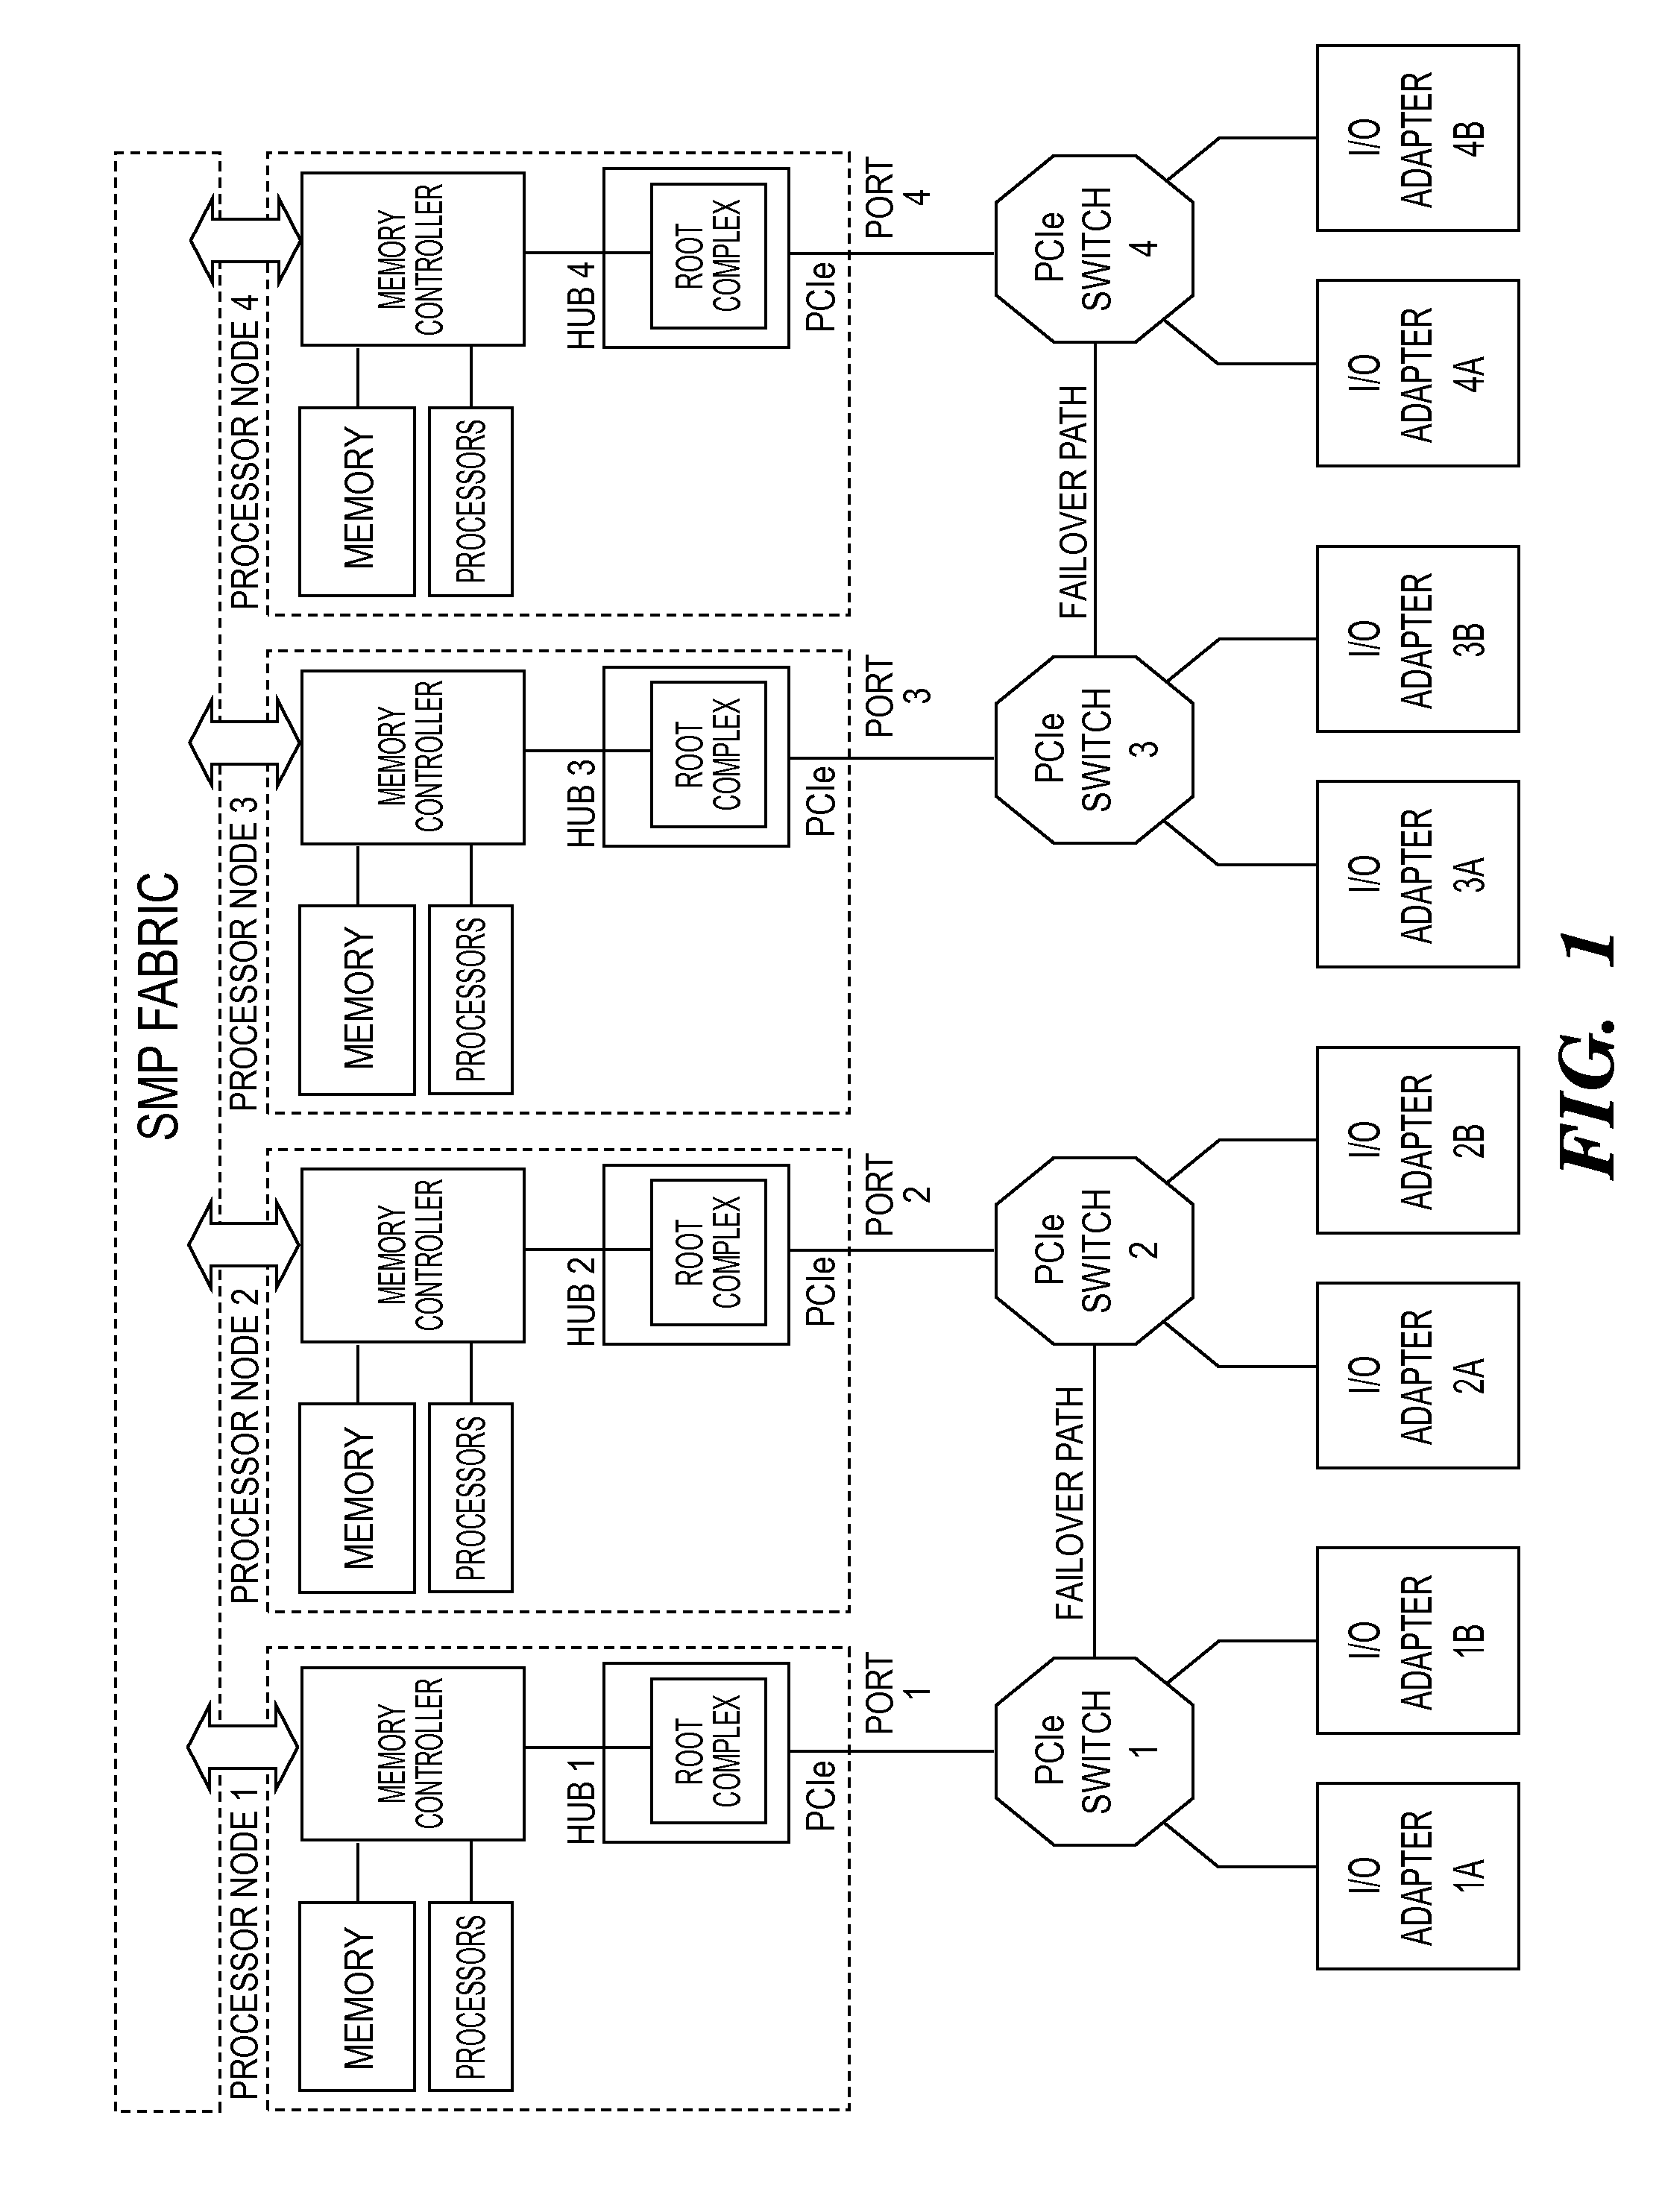 Switch failover control in a multiprocessor computer system